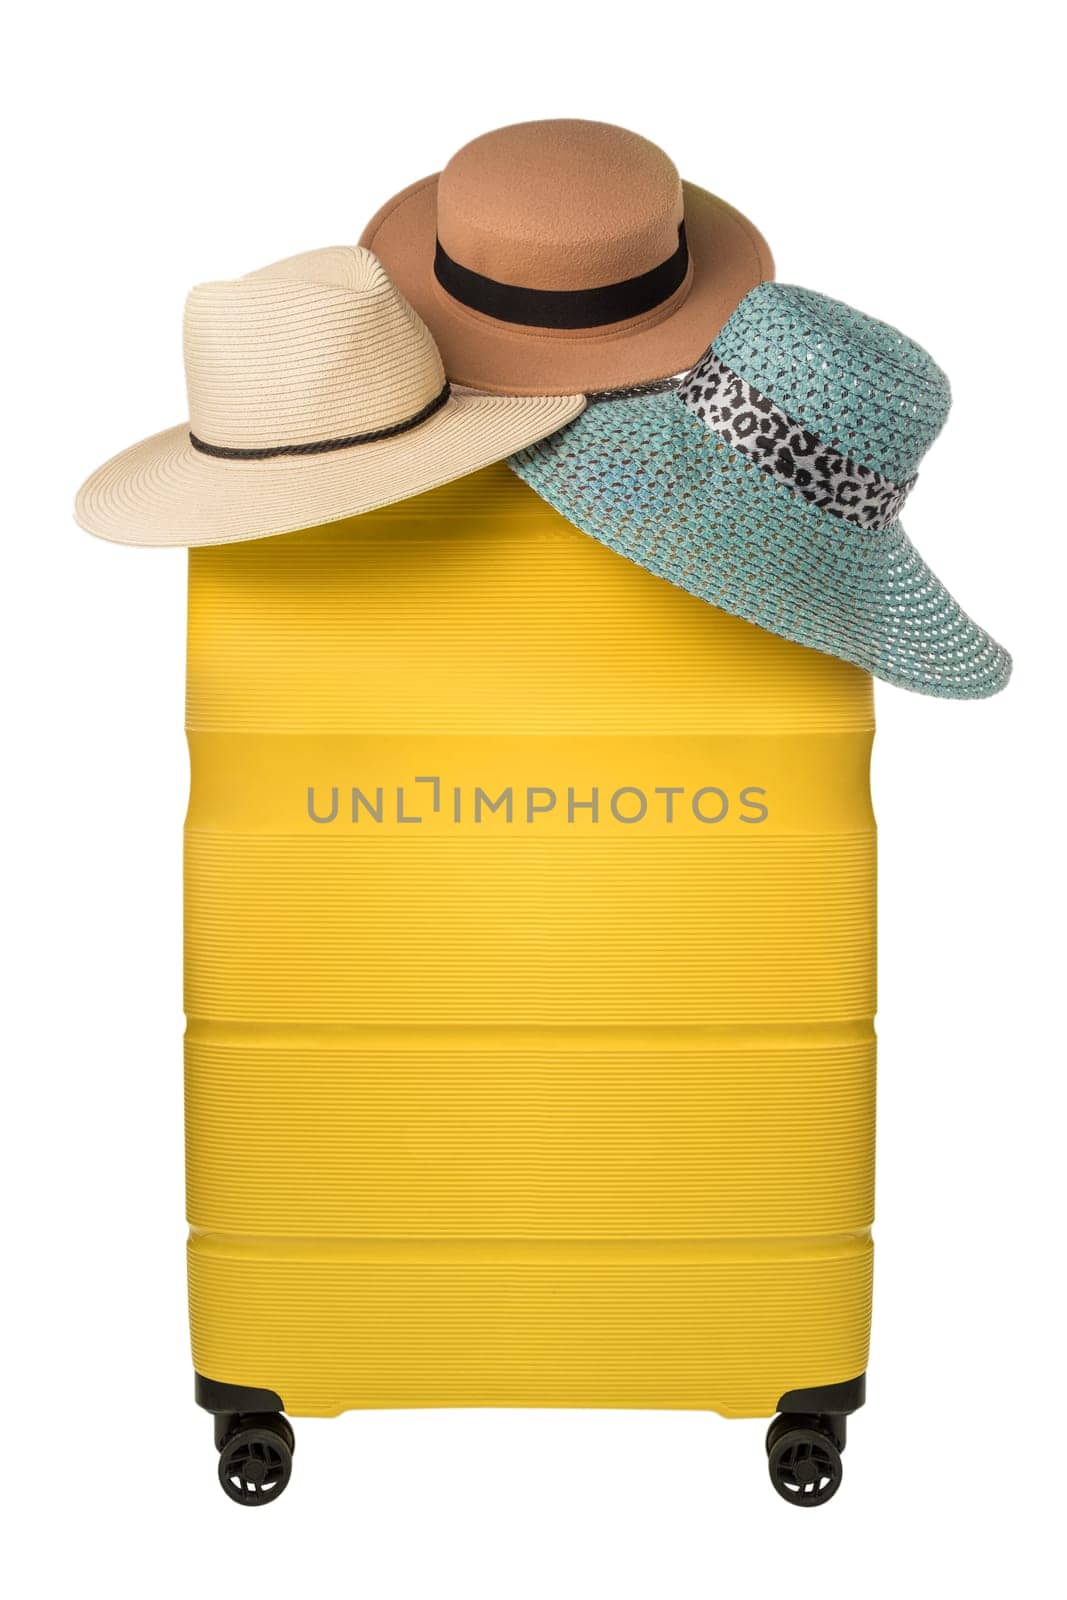 Travel yellow suitcase with hats hanging on top isolated on white background. Travel shopping concept. Travel choice concept